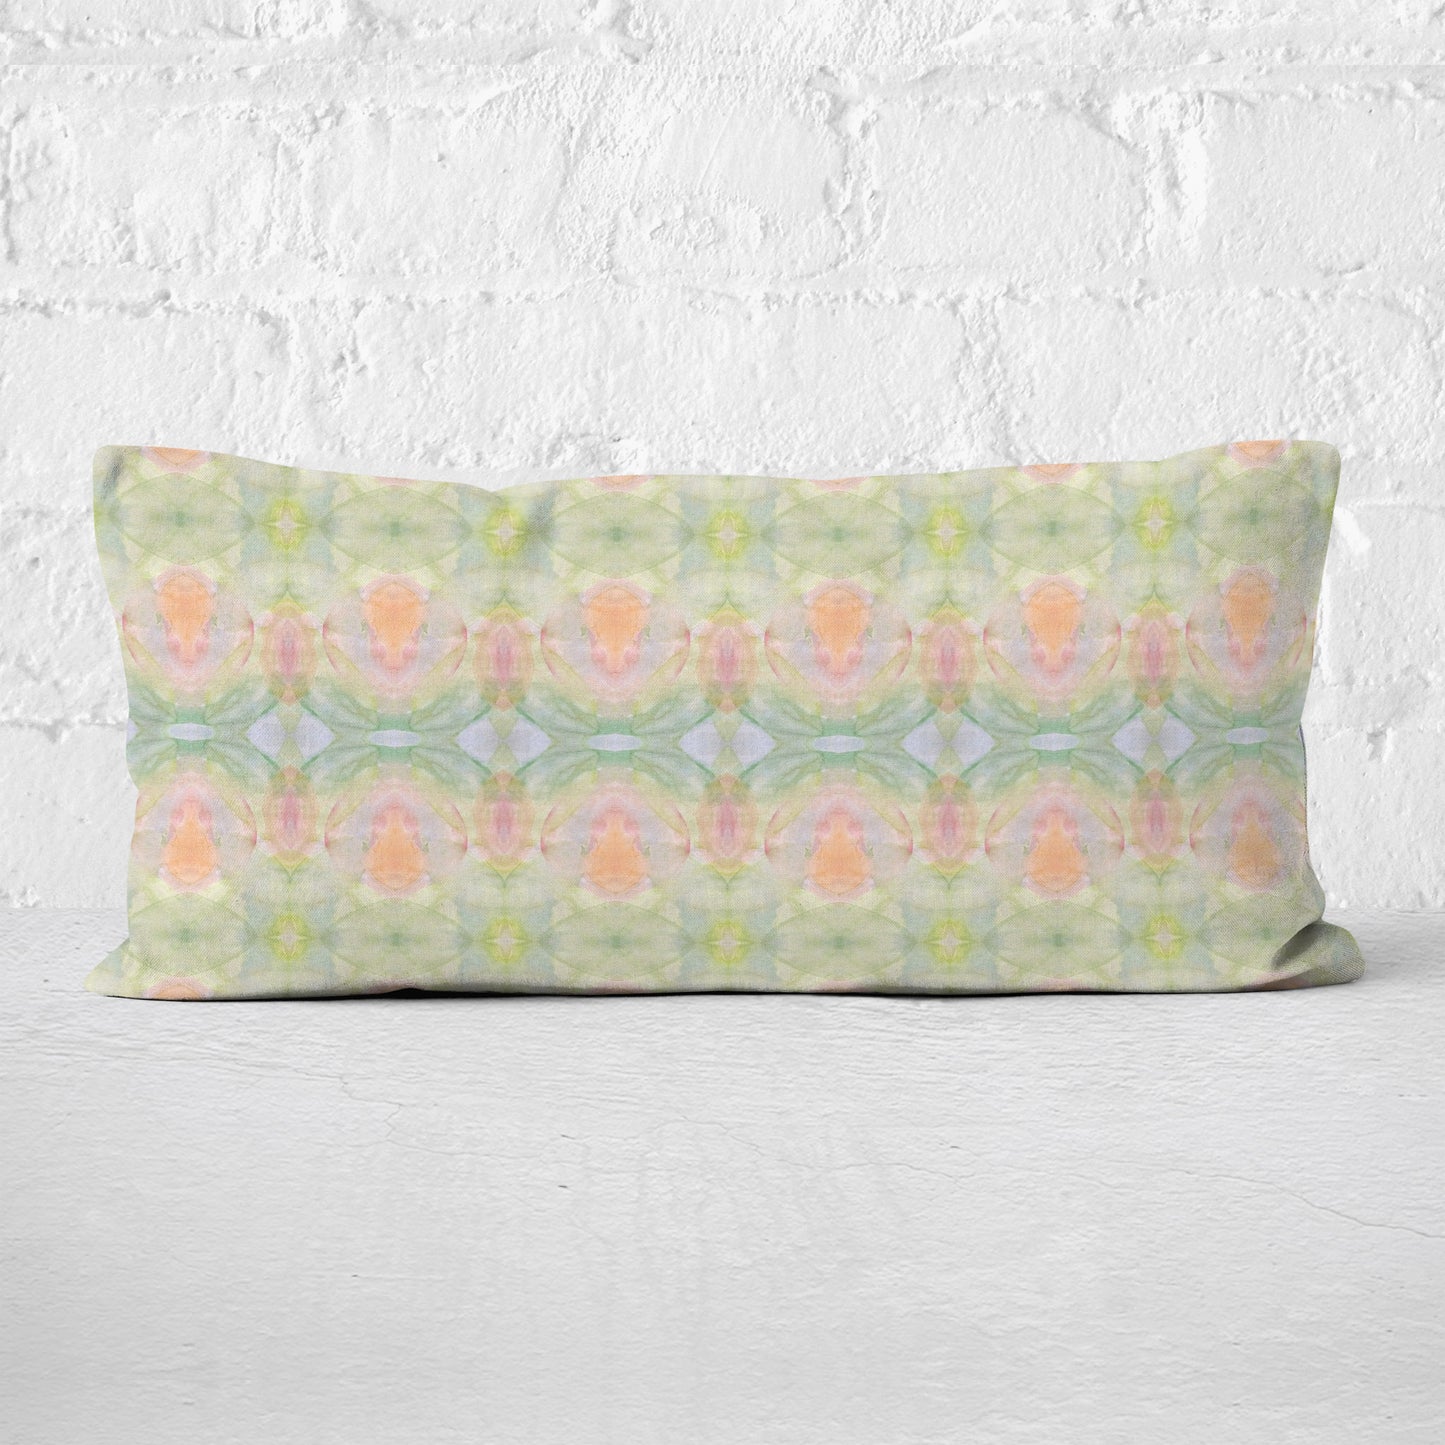 Detail of lumbar pillow featuring a hand-painted abstract pattern in pastel colors.